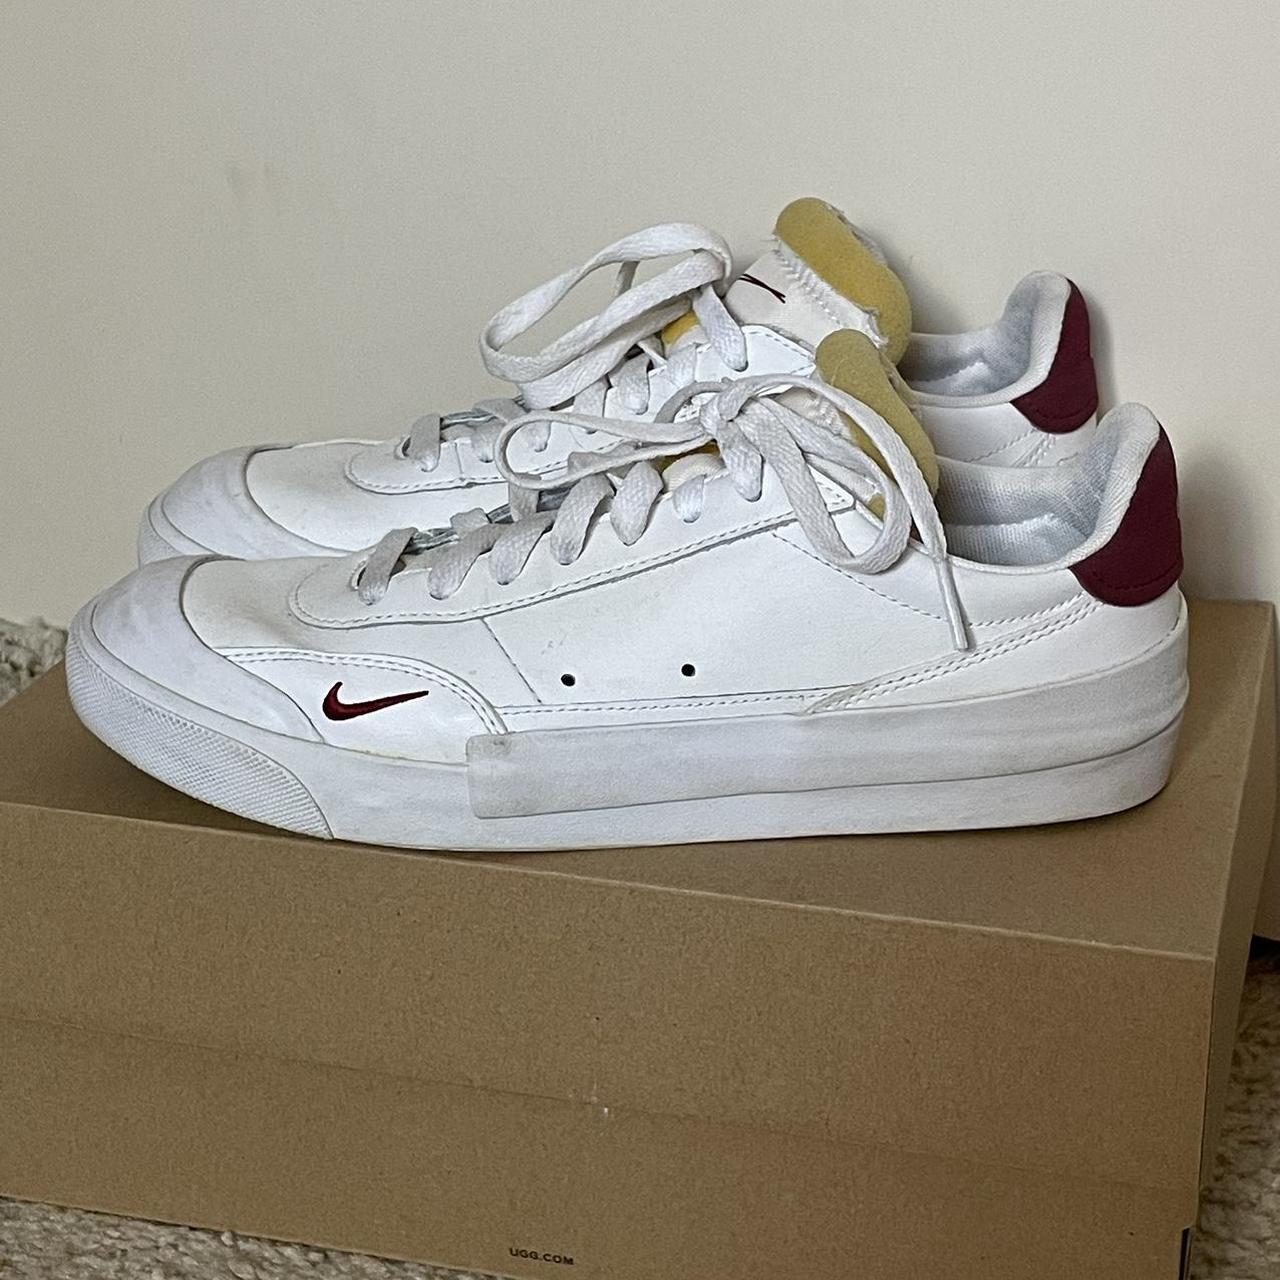 Nike shoes⭐️ white in color slightly worn Size:... - Depop